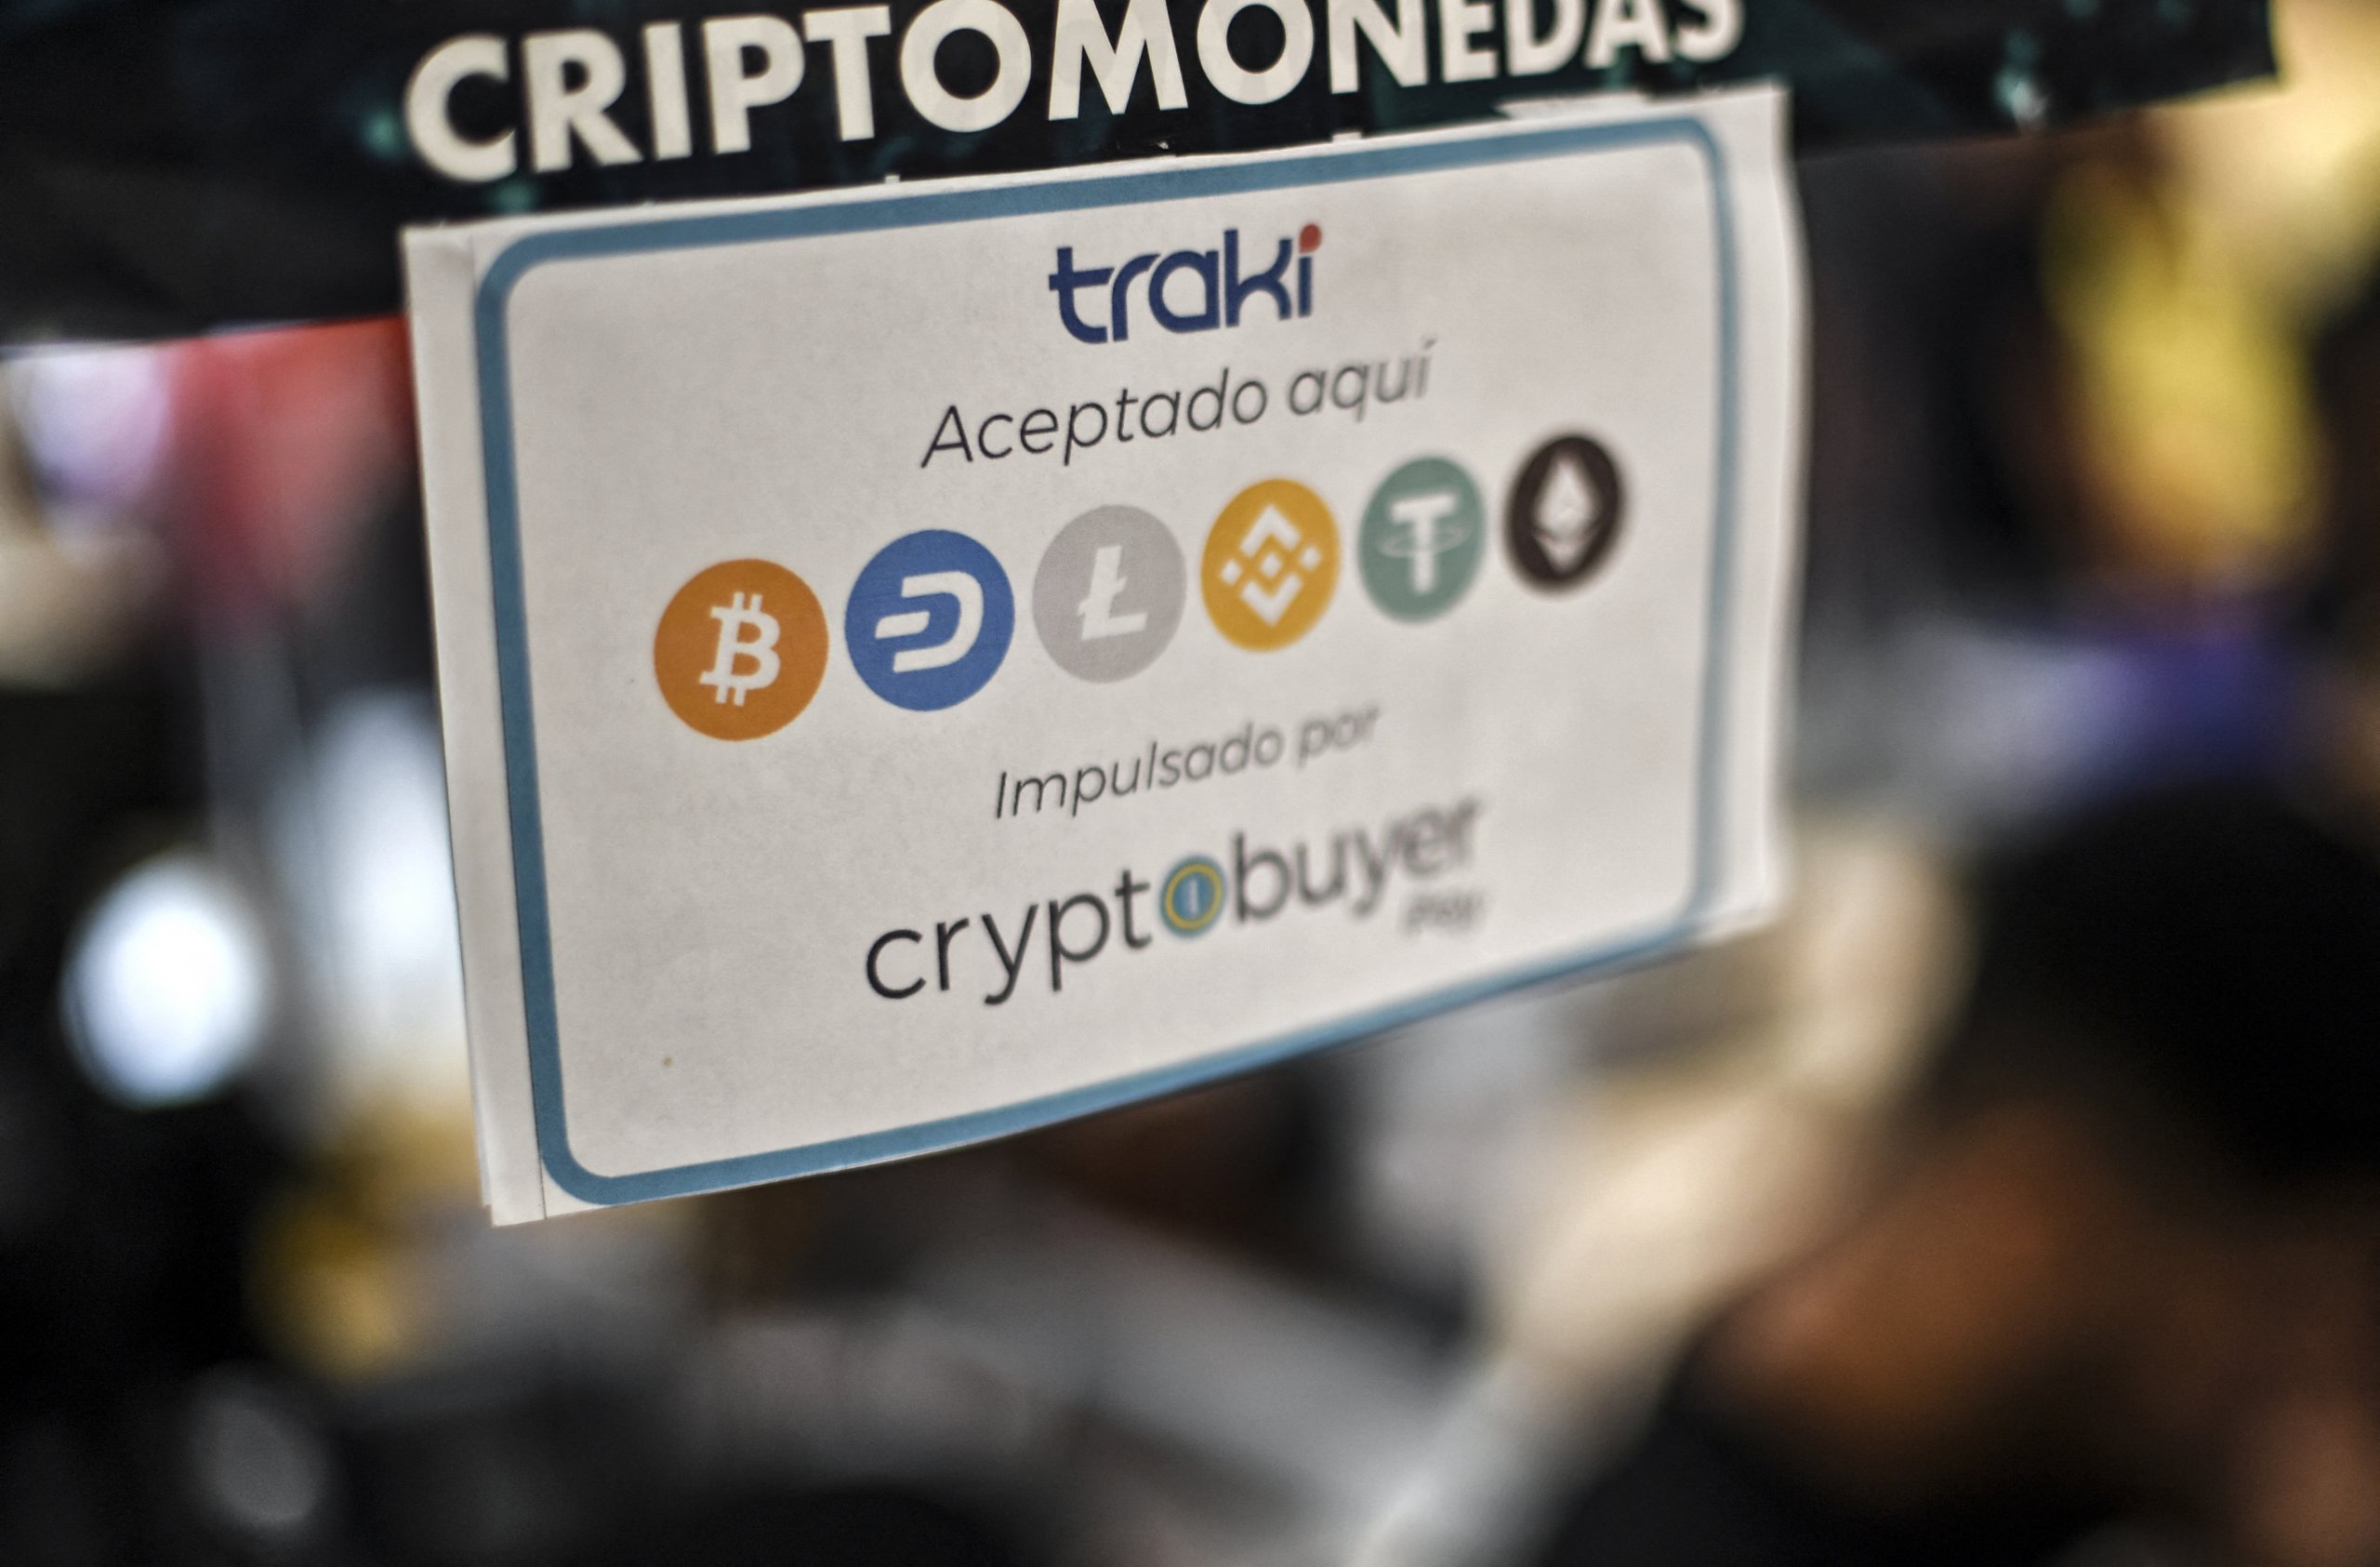 The barriers to widespread adoption of direct crypto payments for everyday items are considerable -- perhaps even unsurmountable